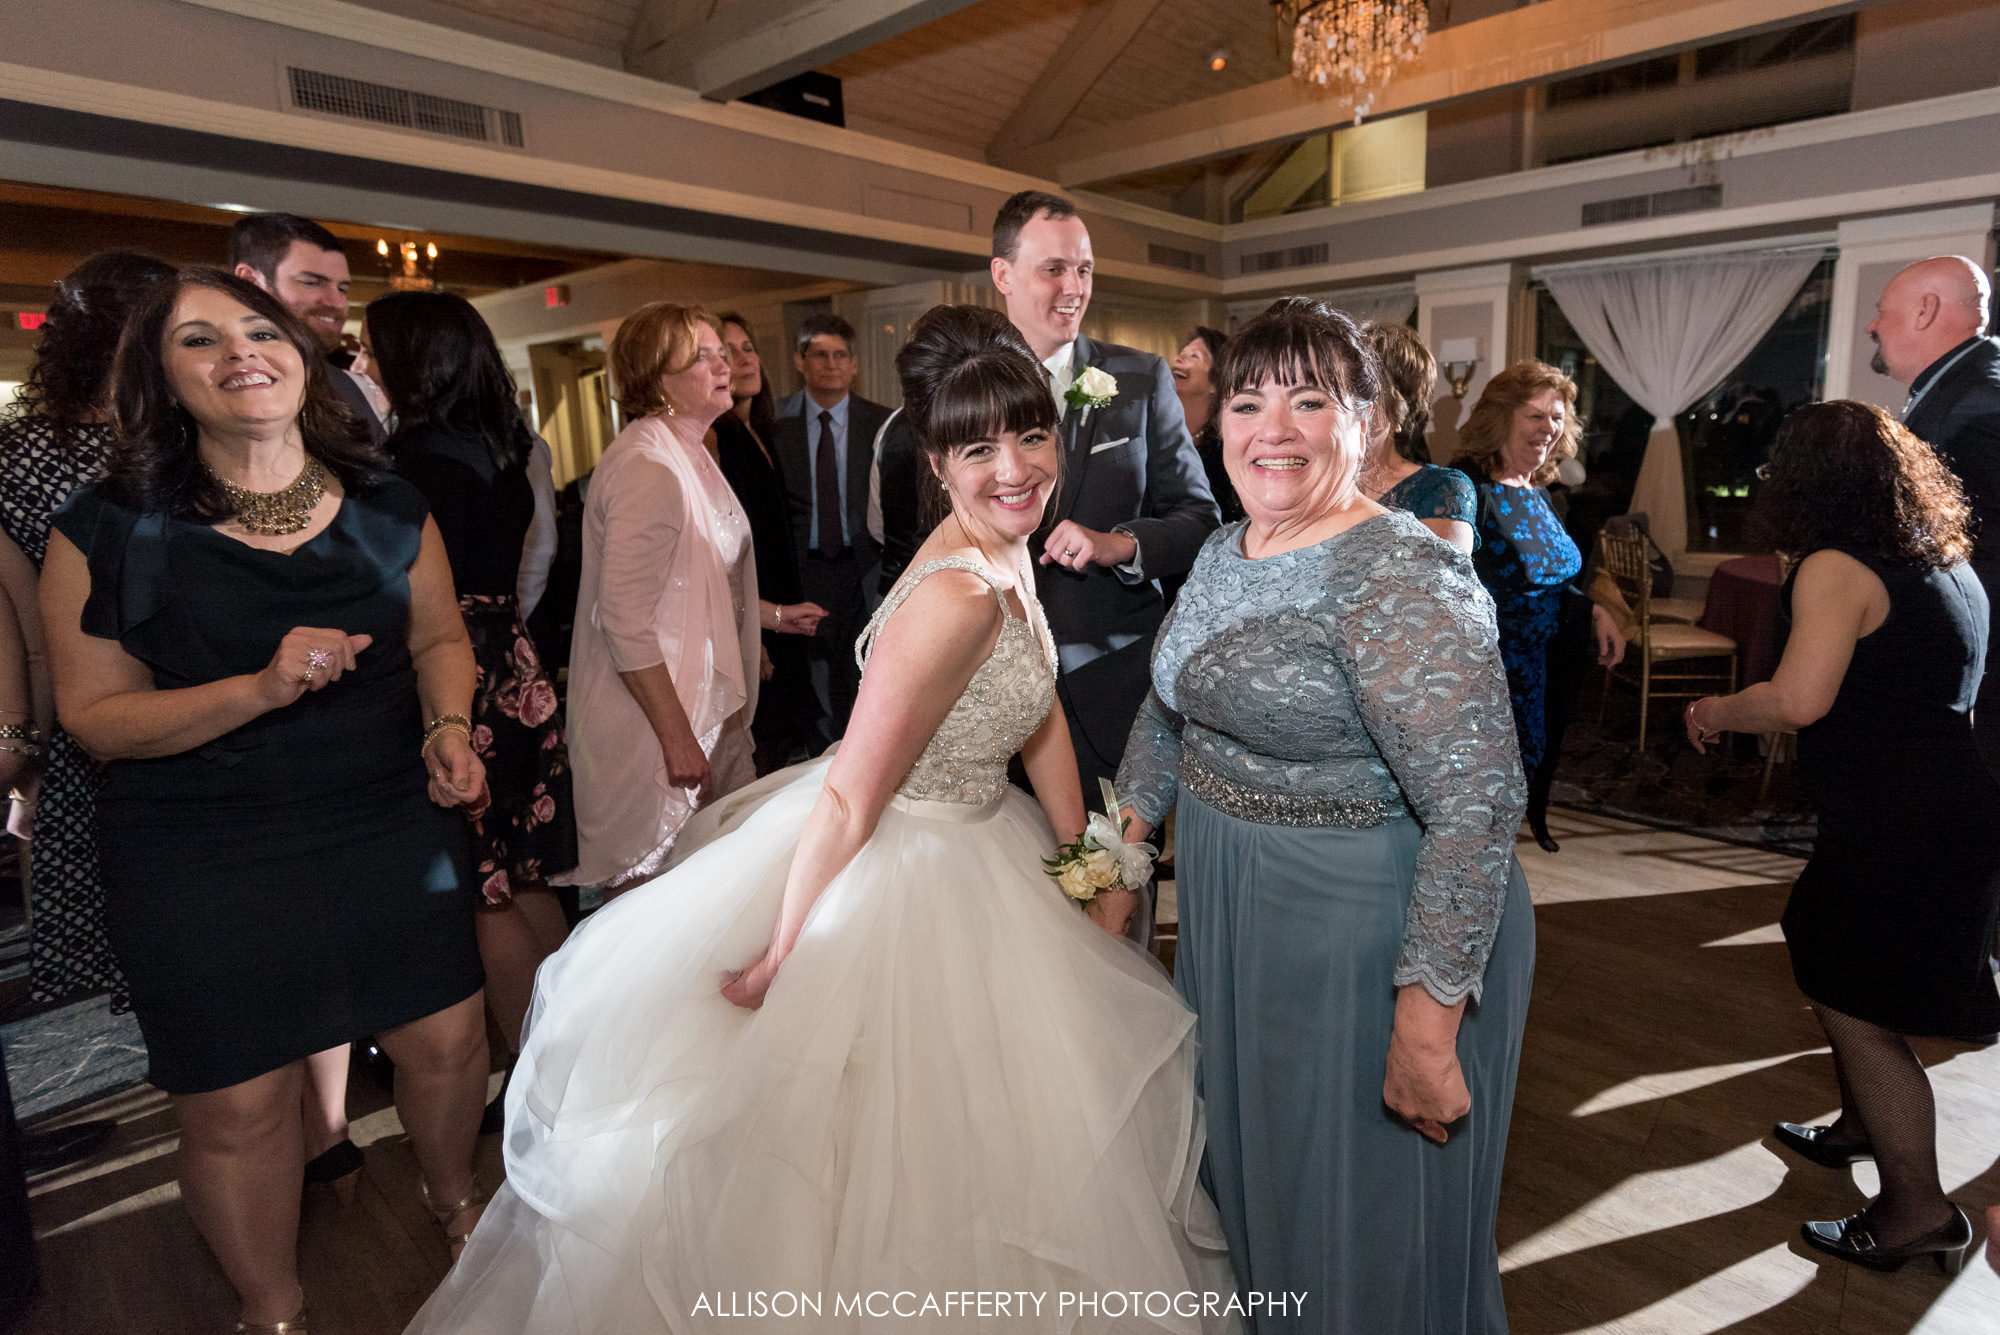 Bride and her Mom on the dance floor during a wedding